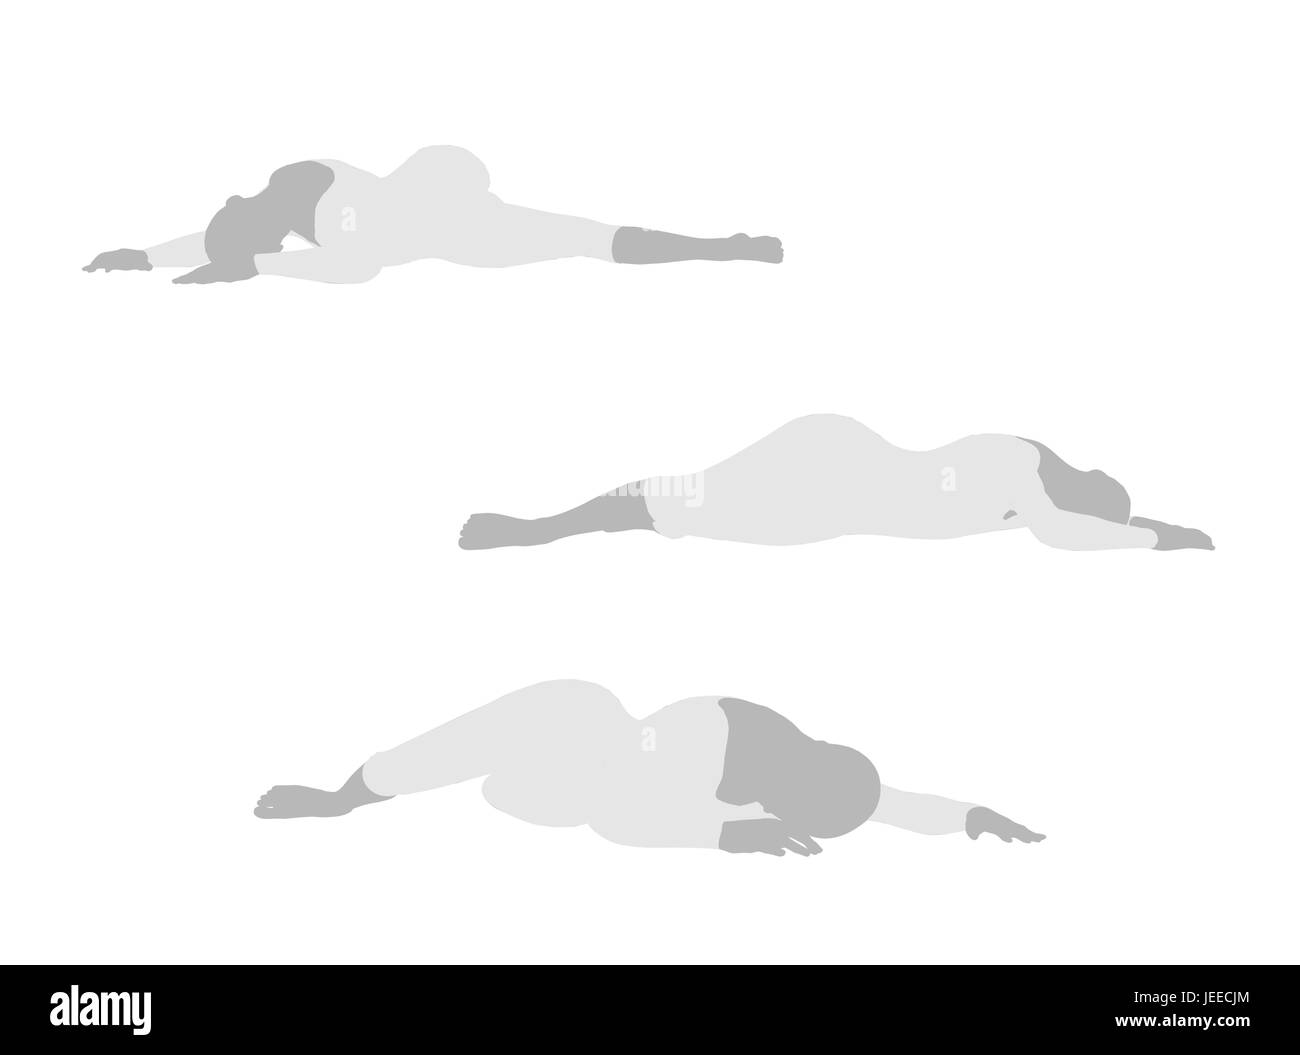 EPS 10 vector illustration of woman silhouette in fallen Pose Stock Vector